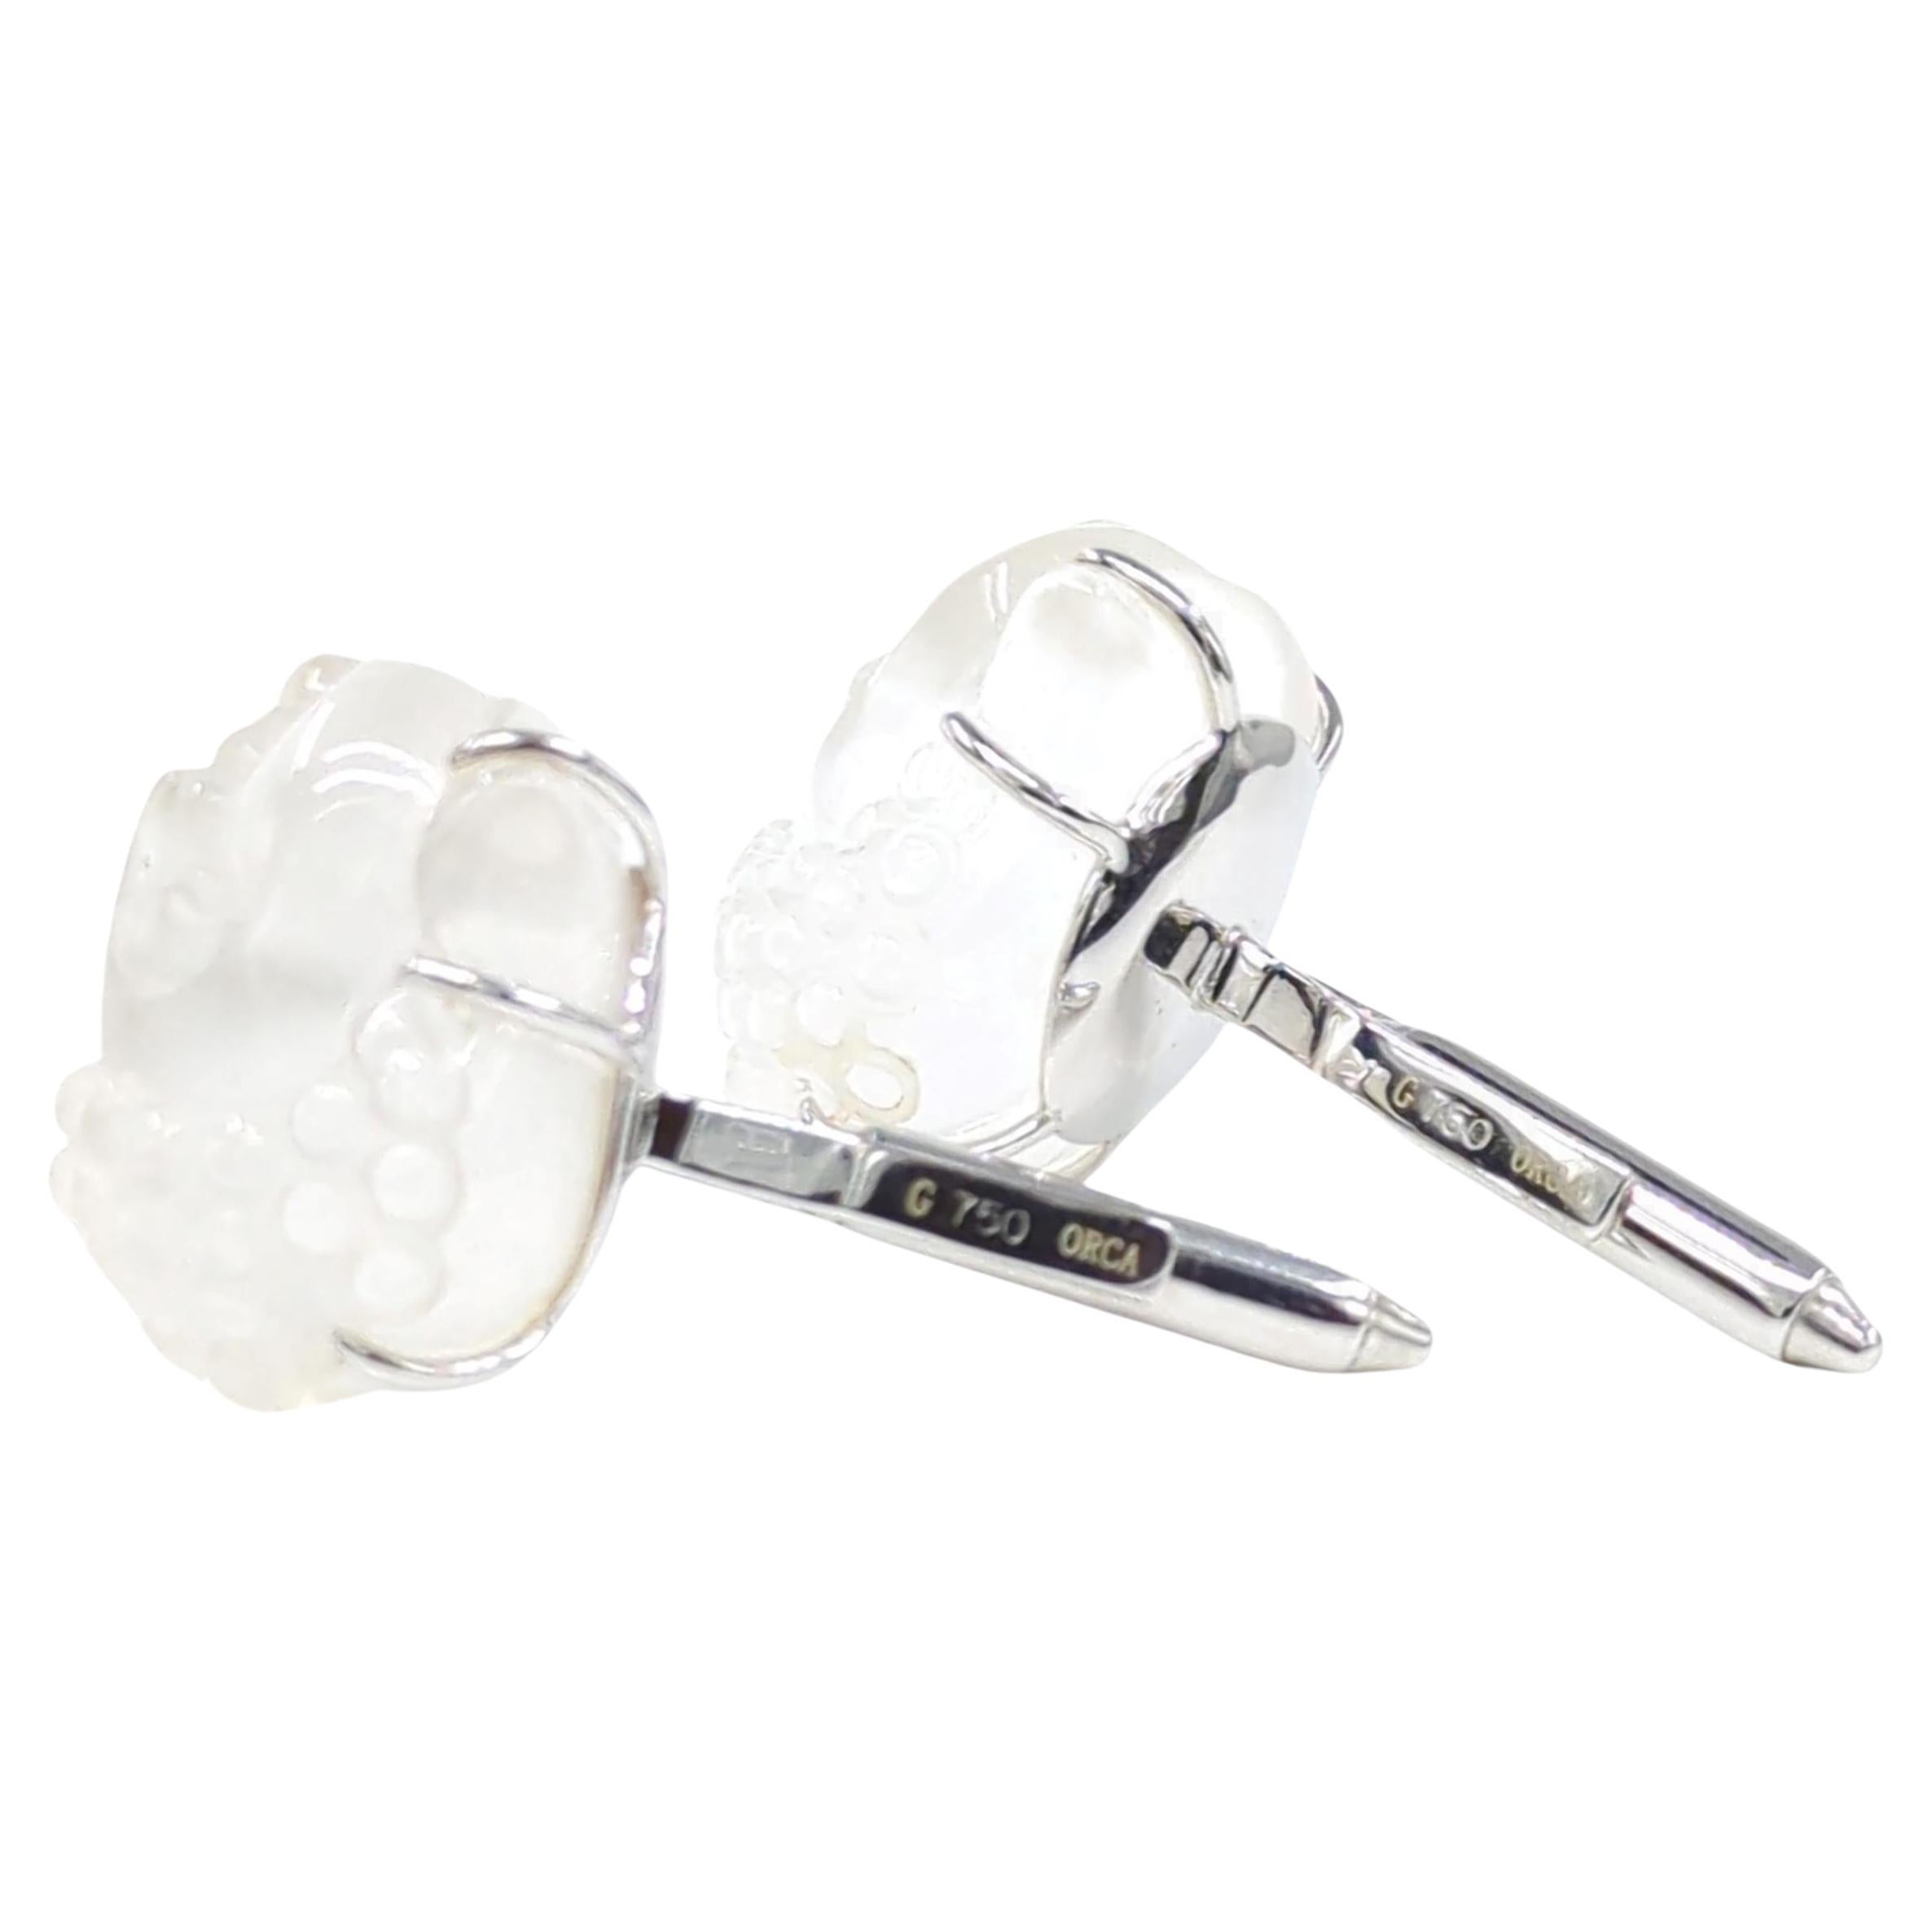 This pair of cufflinks is a remarkable fusion of spirituality and luxury, featuring very rare carved rock crystal Buddha heads. Each cufflink showcases a serene Buddha face, eyes gently closed in a meditative state, exuding a sense of peace and